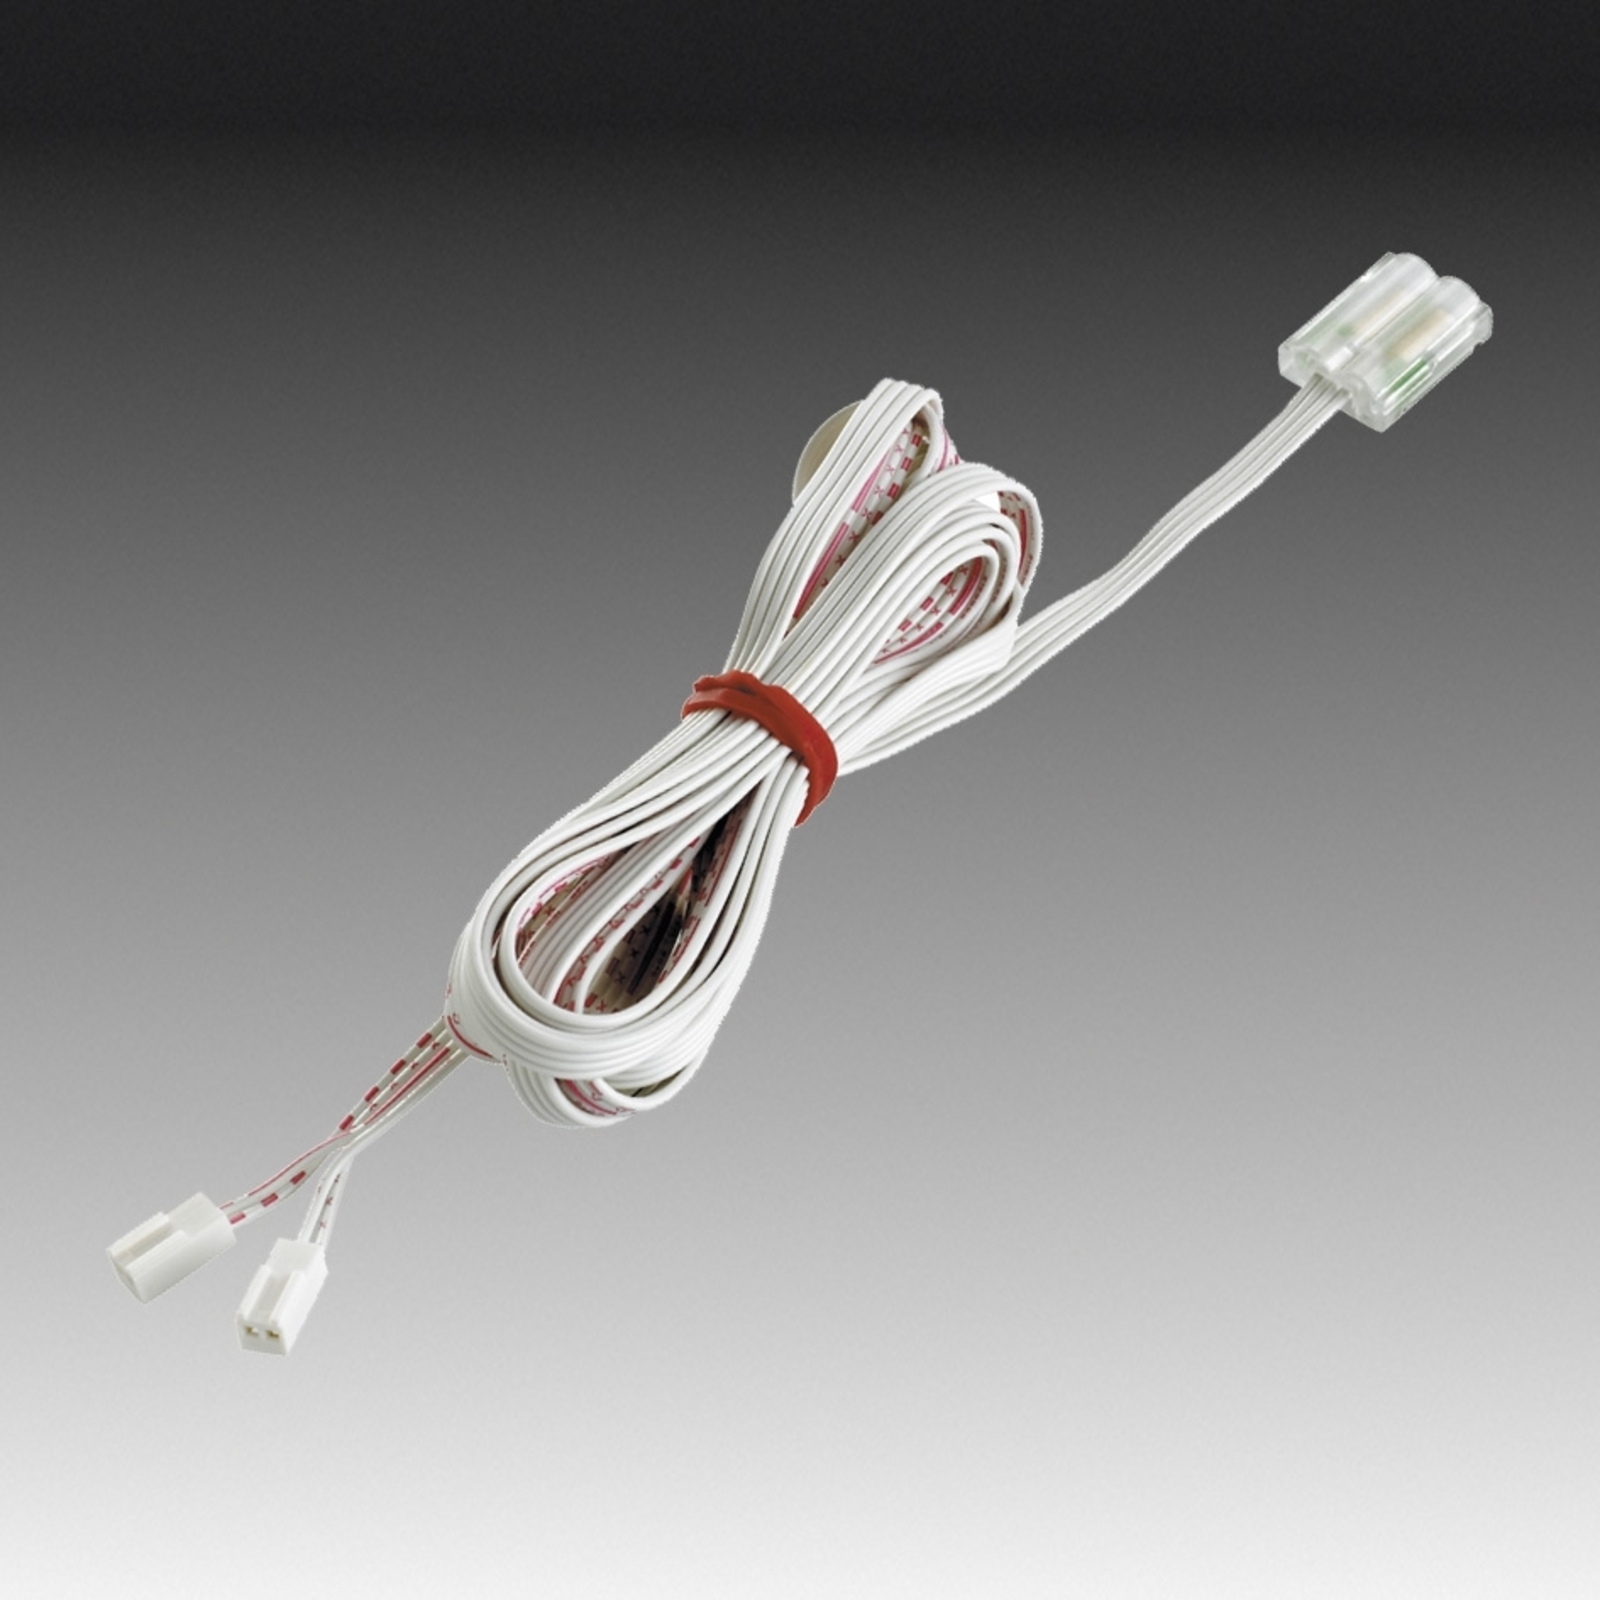 Connection cable for LED IN-STICK 2